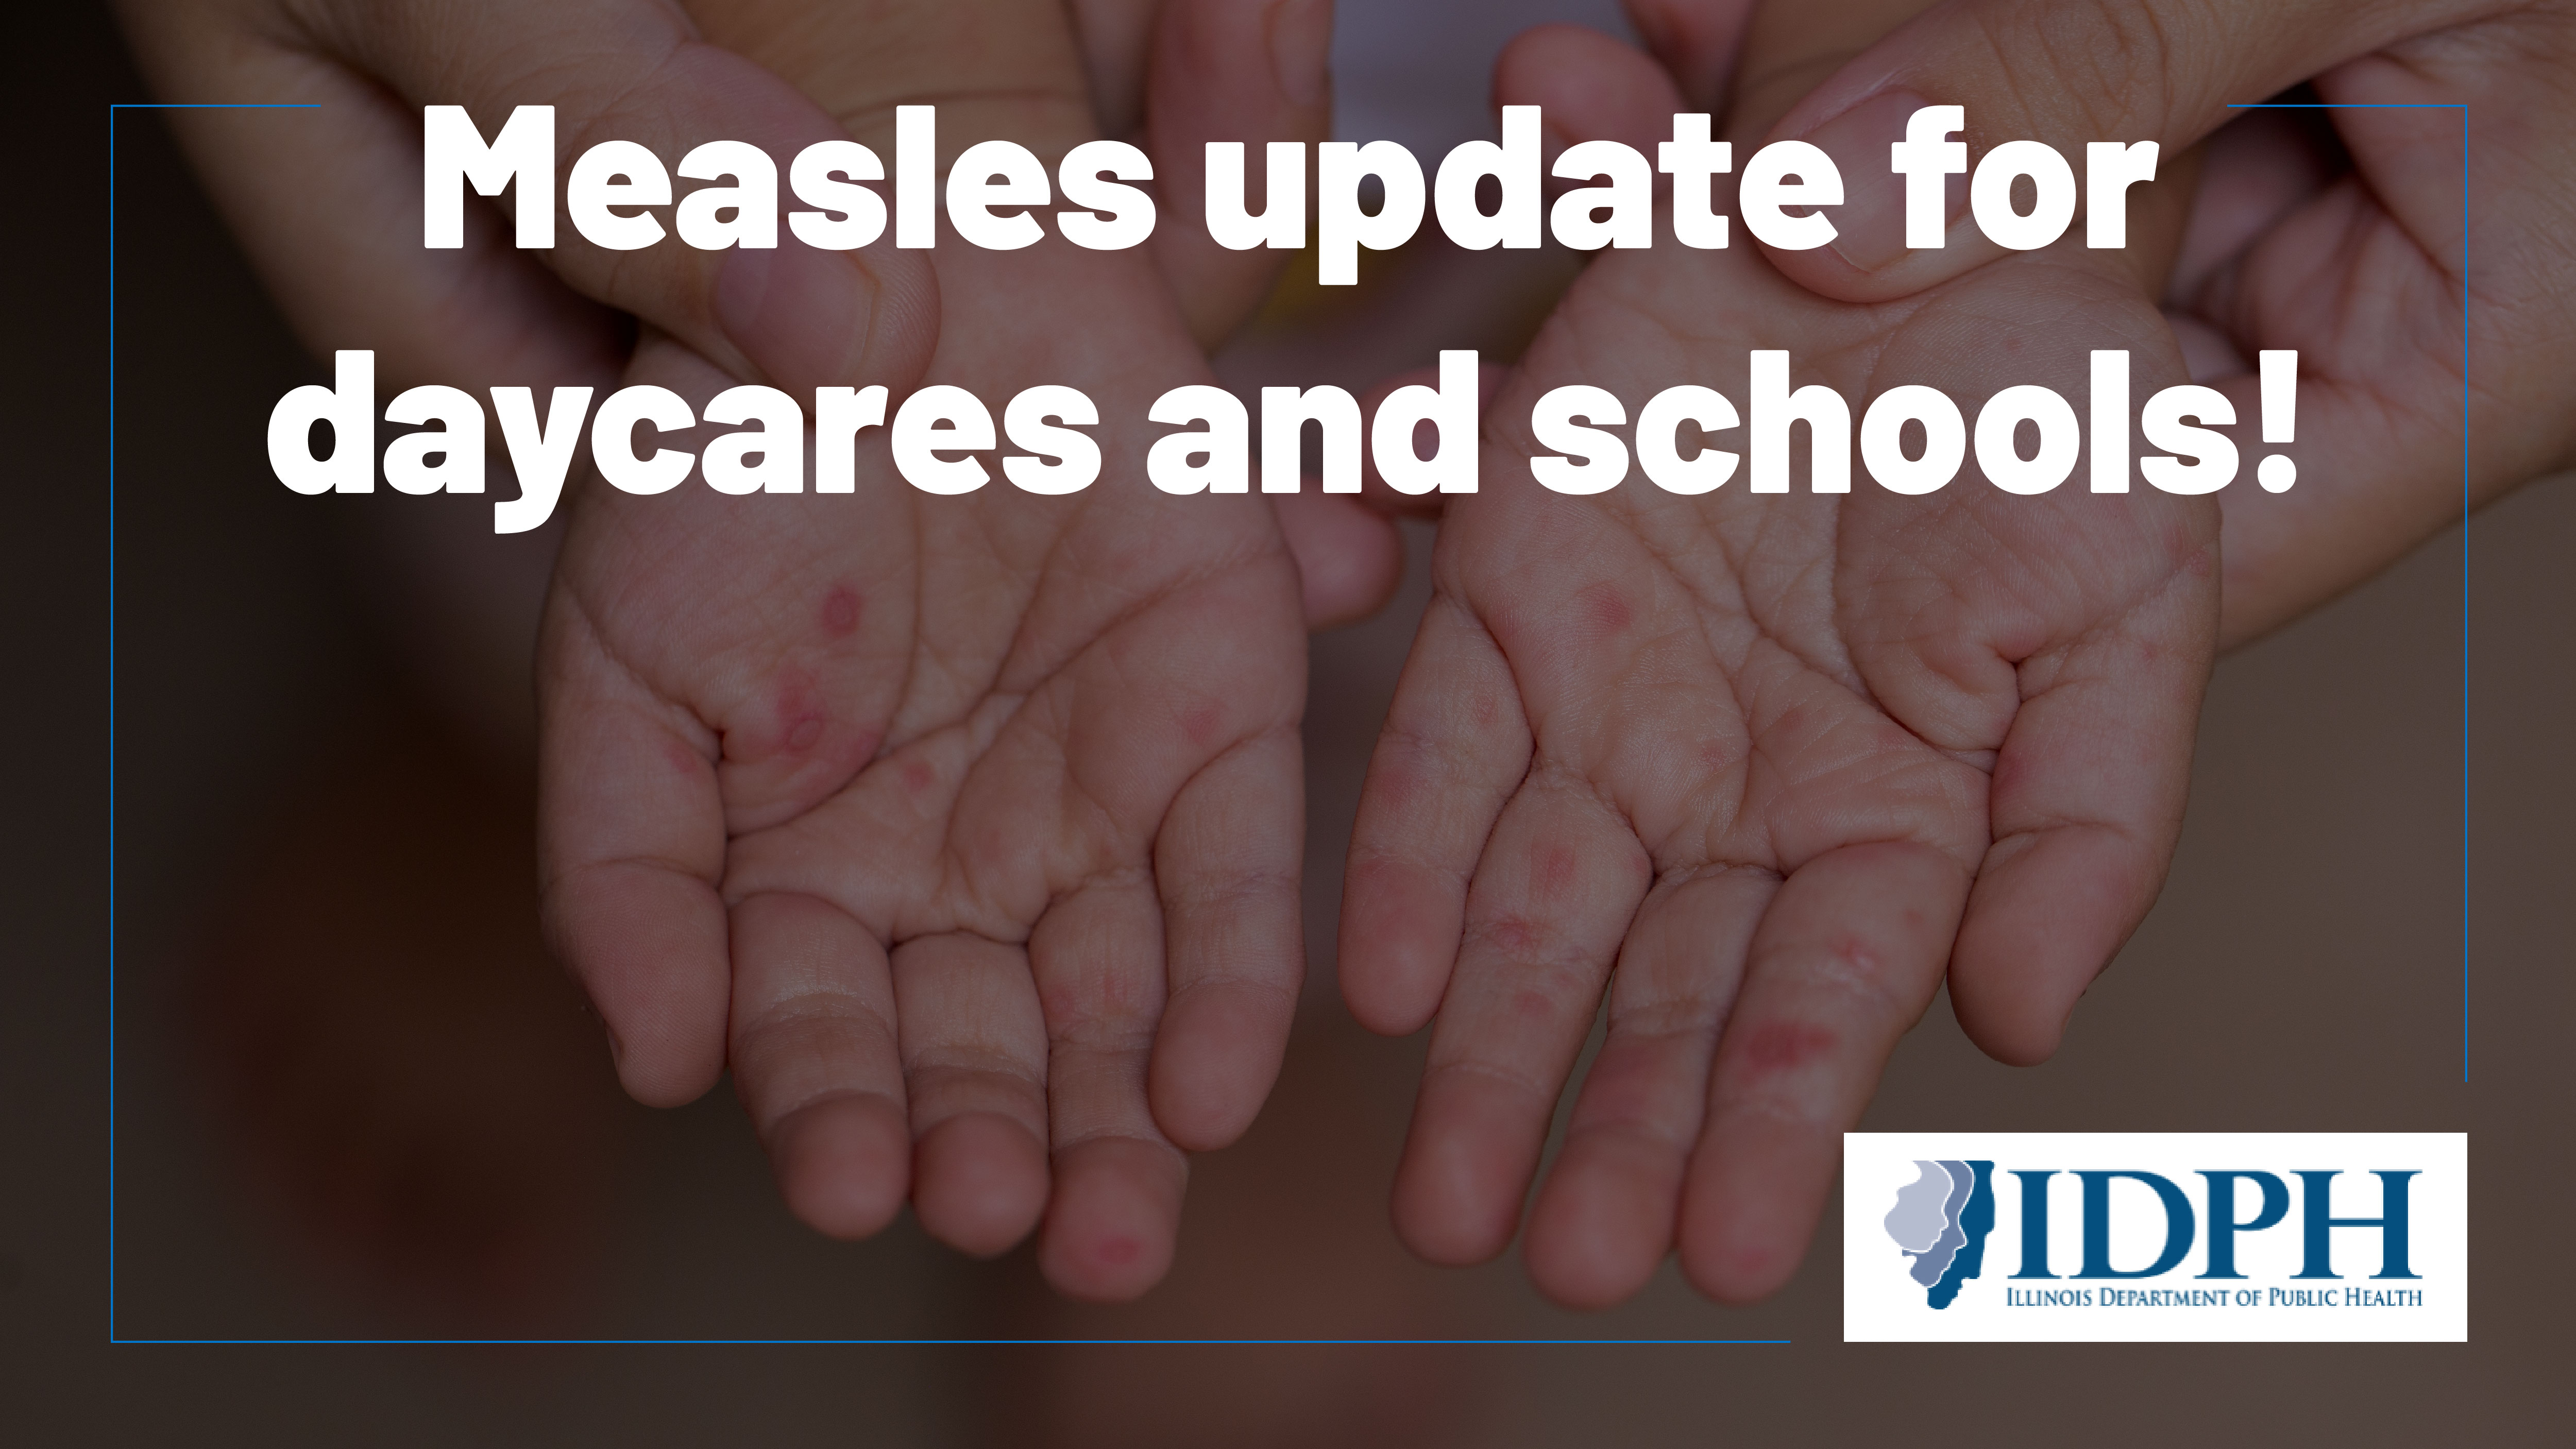 Measles update for daycares and schools. Child's hands with measles. 